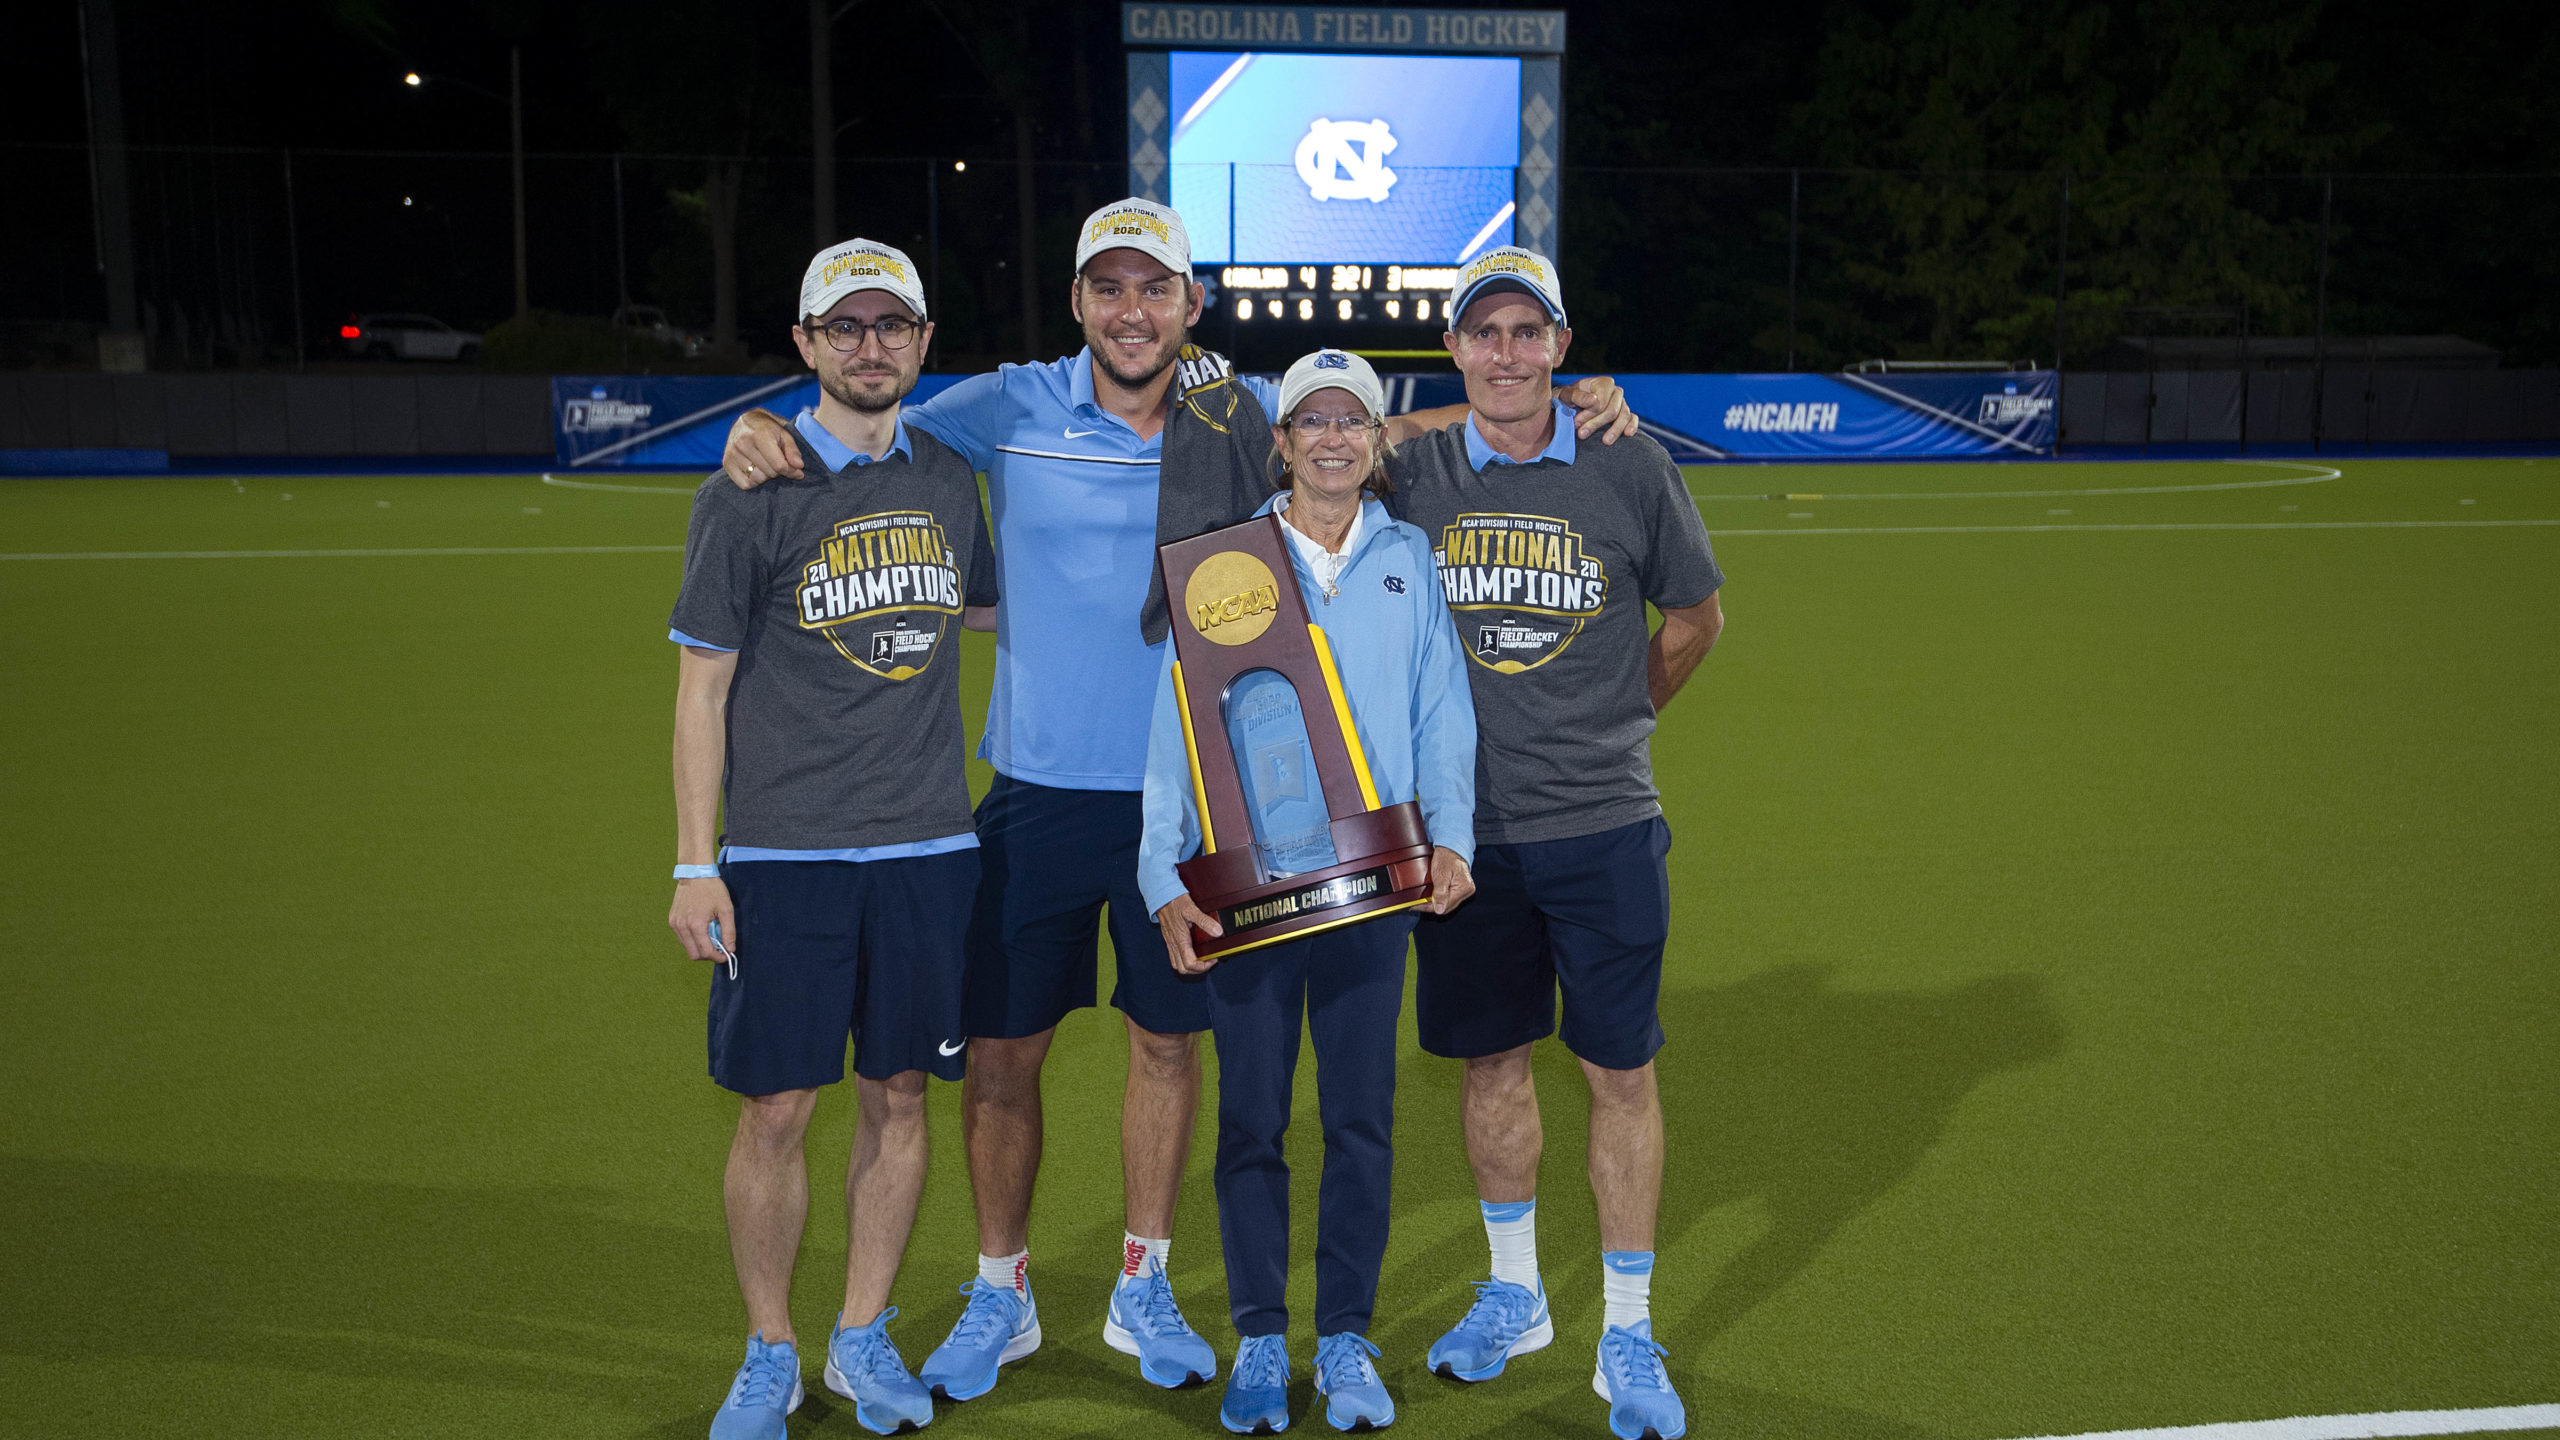 nfhca announces 2020 nfhca division I regional coaching staffs of the year photo with trophy